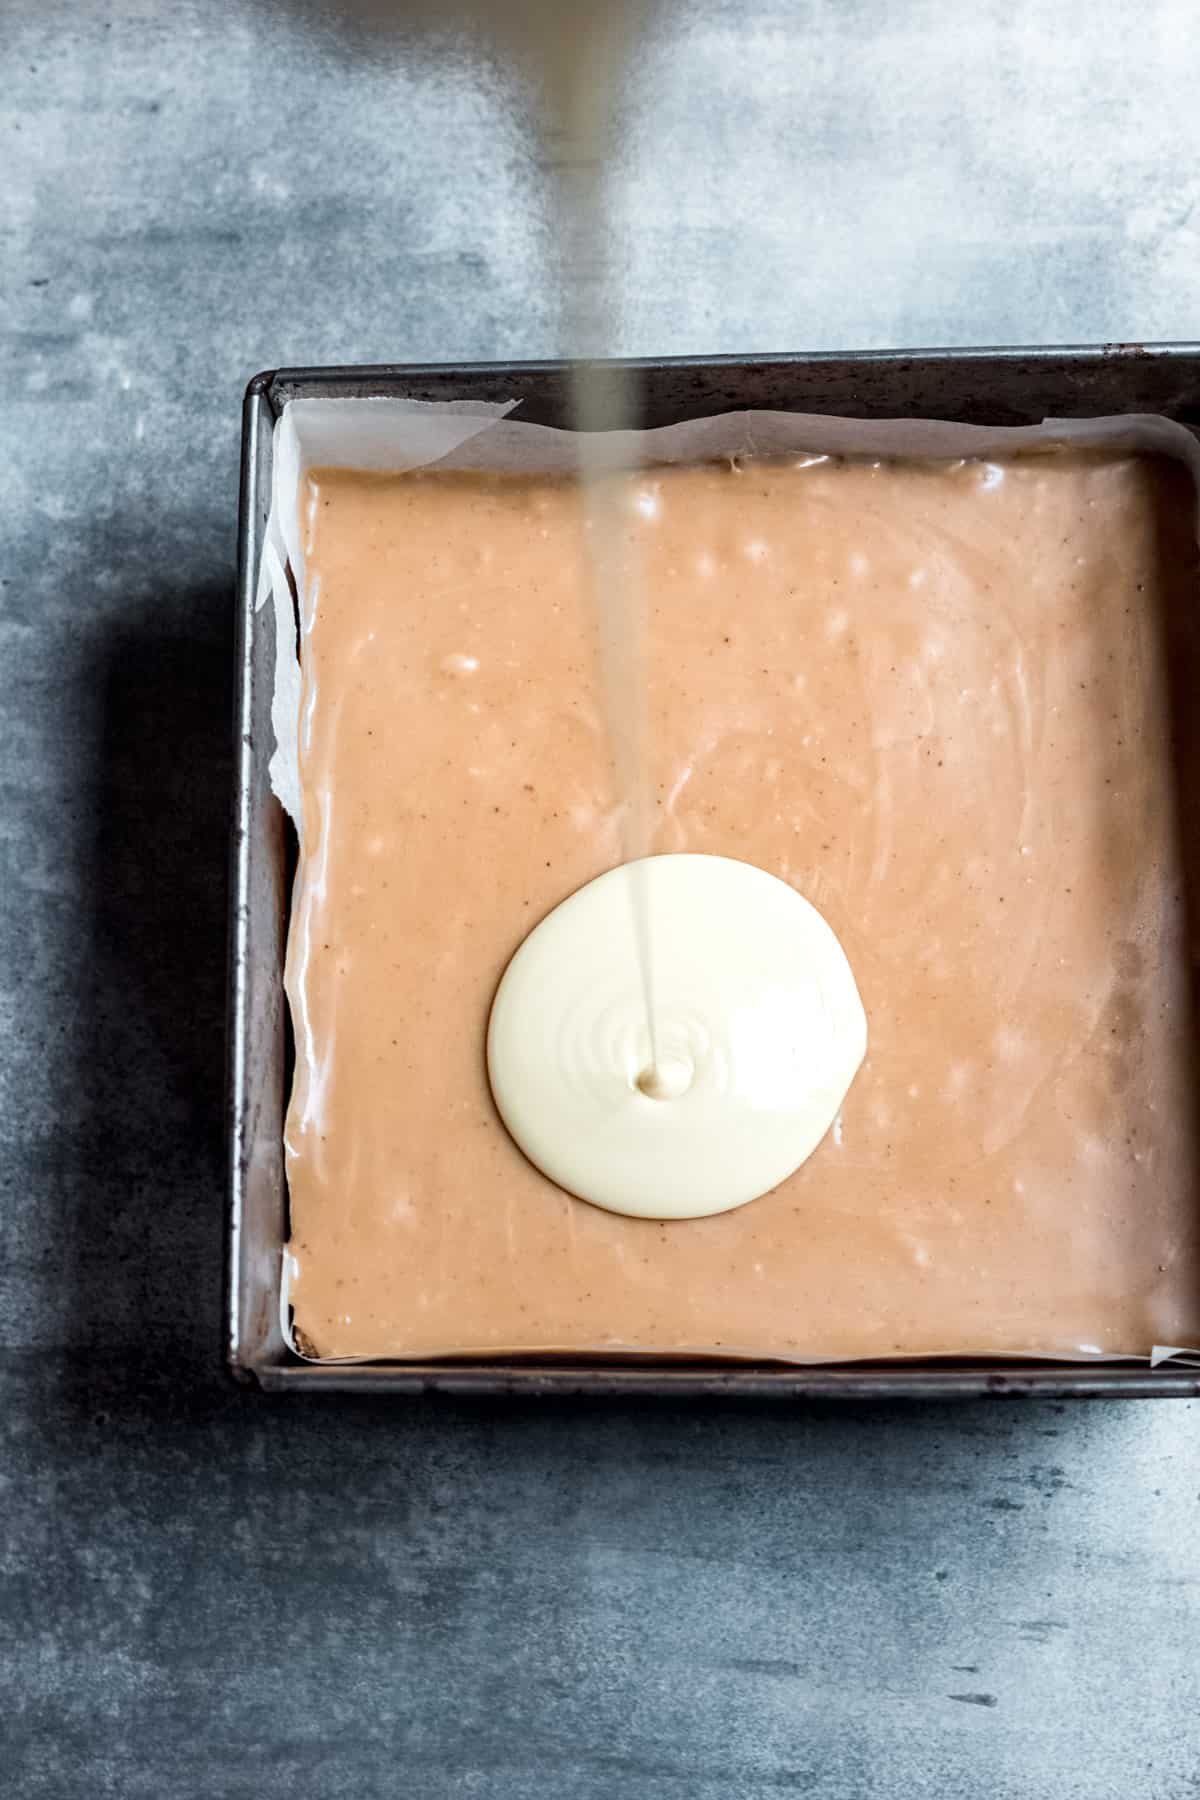 white chocolate being poured over the caramel